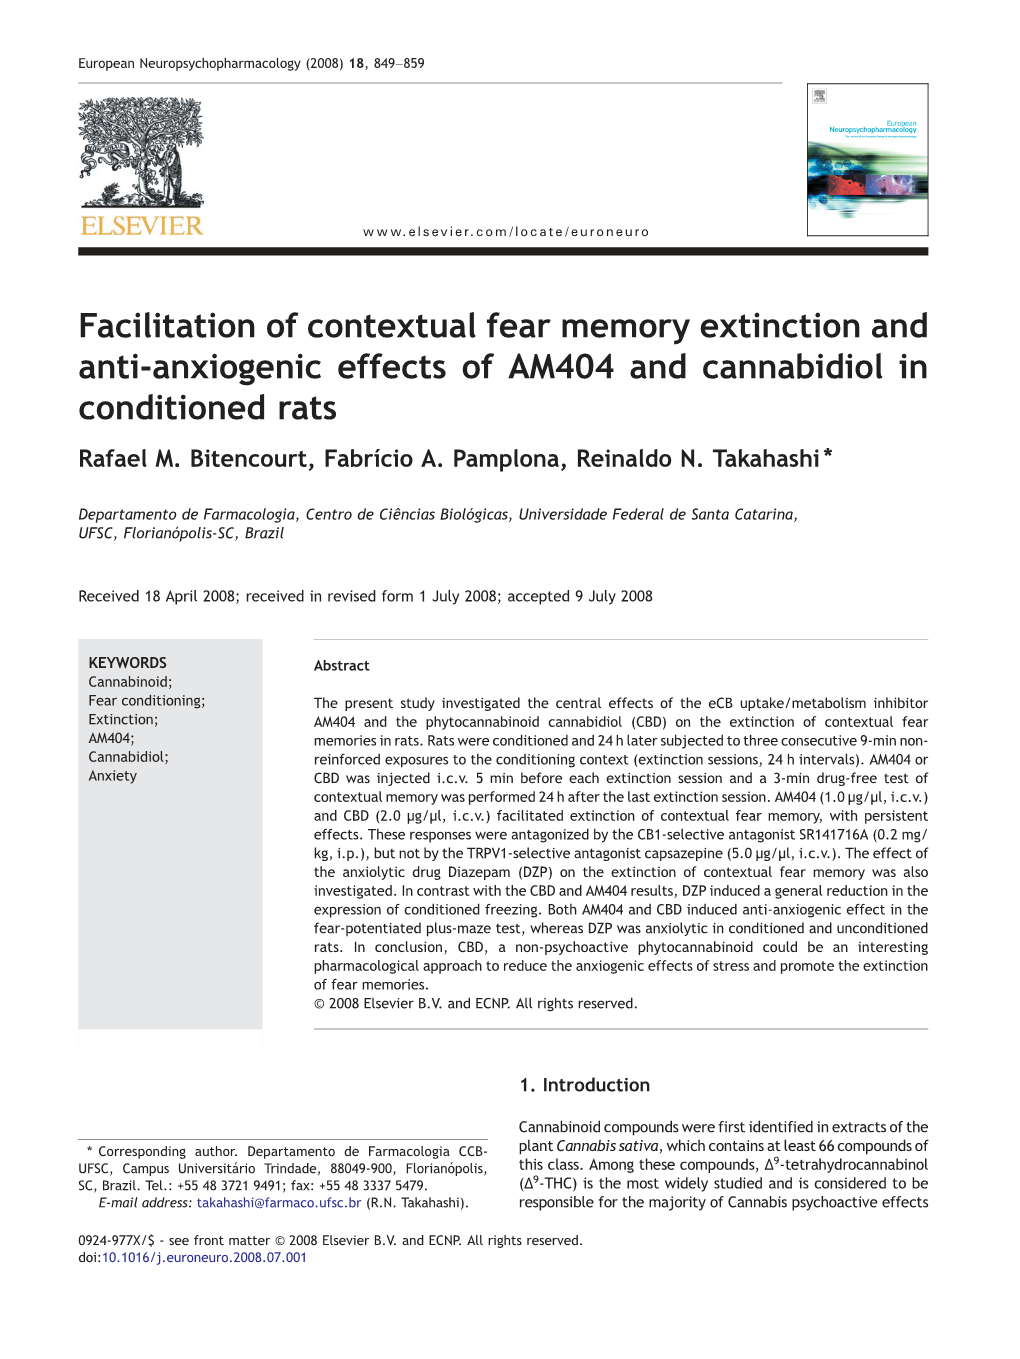 Facilitation of Contextual Fear Memory Extinction and Anti-Anxiogenic Effects of AM404 and Cannabidiol in Conditioned Rats Rafael M